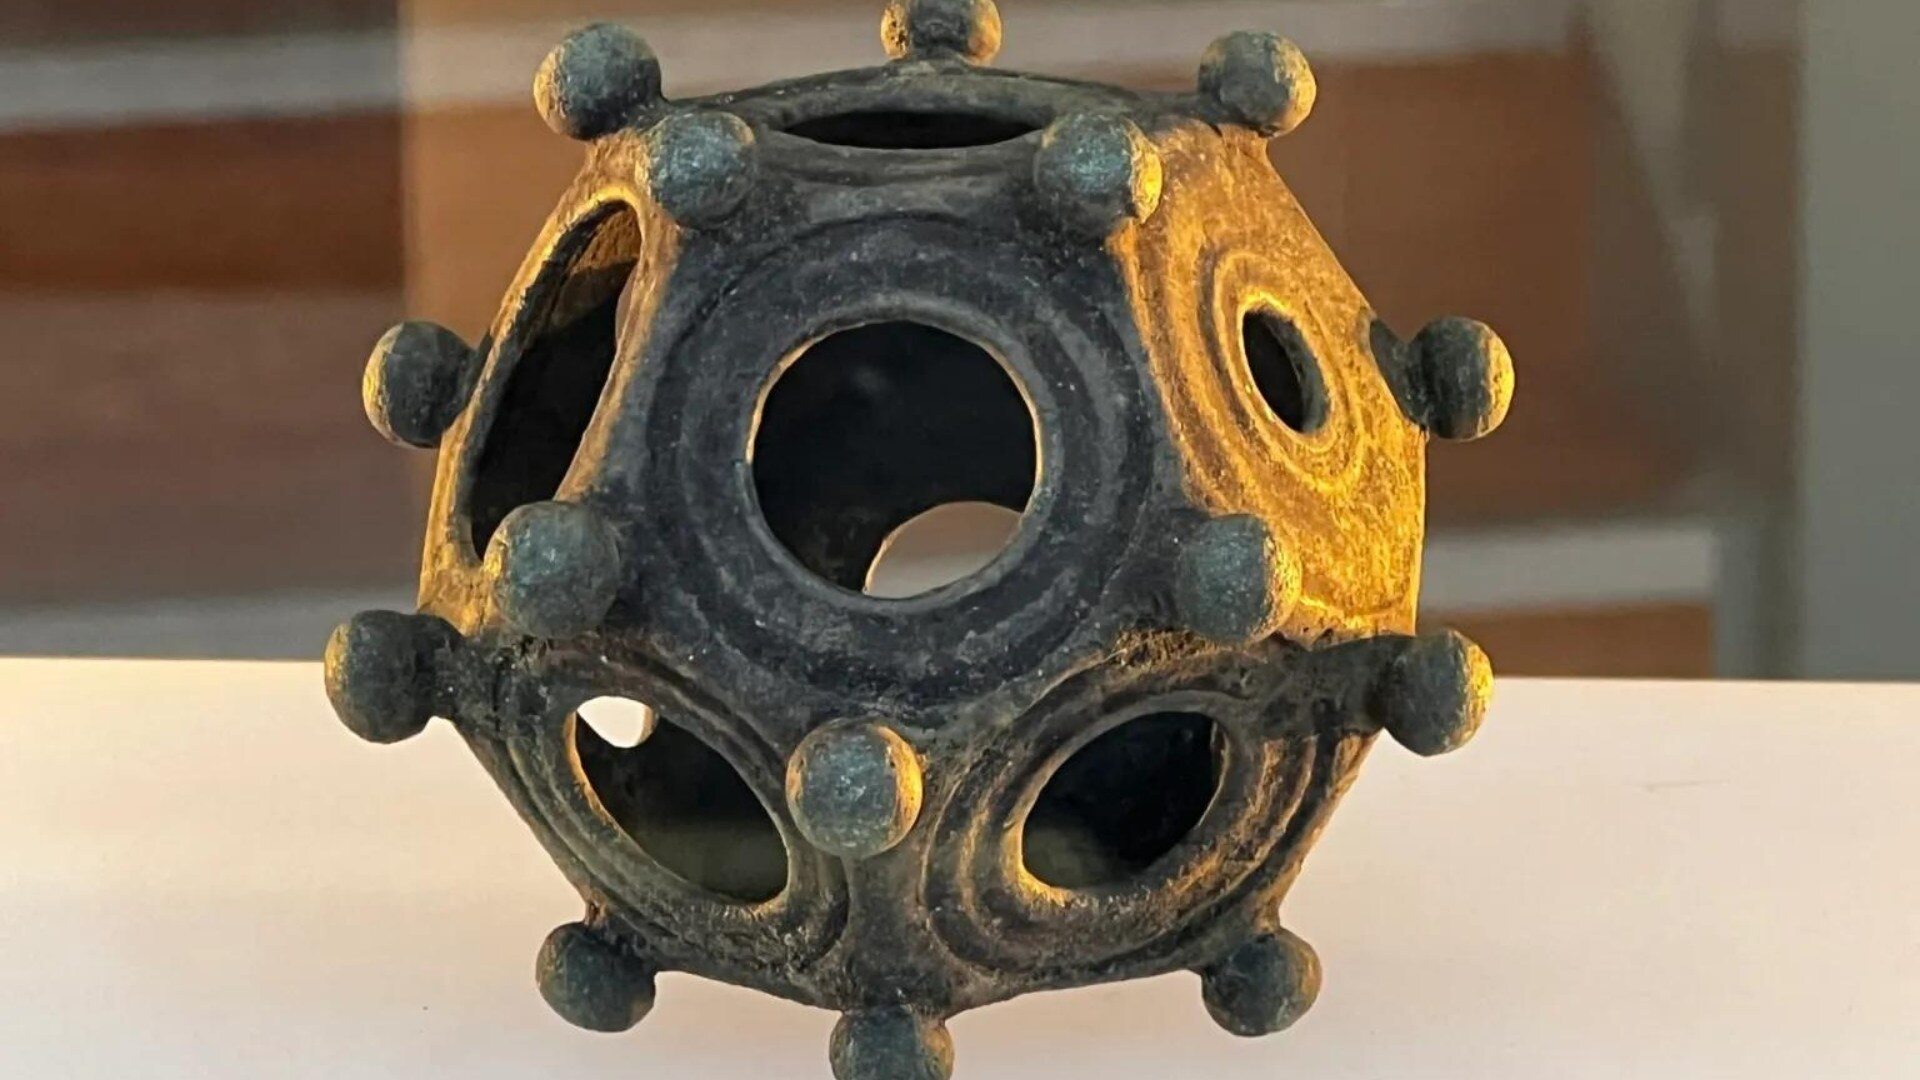 Treasure hunters found a mysterious dodecahedron.  "One of the greatest mysteries of archaeology"